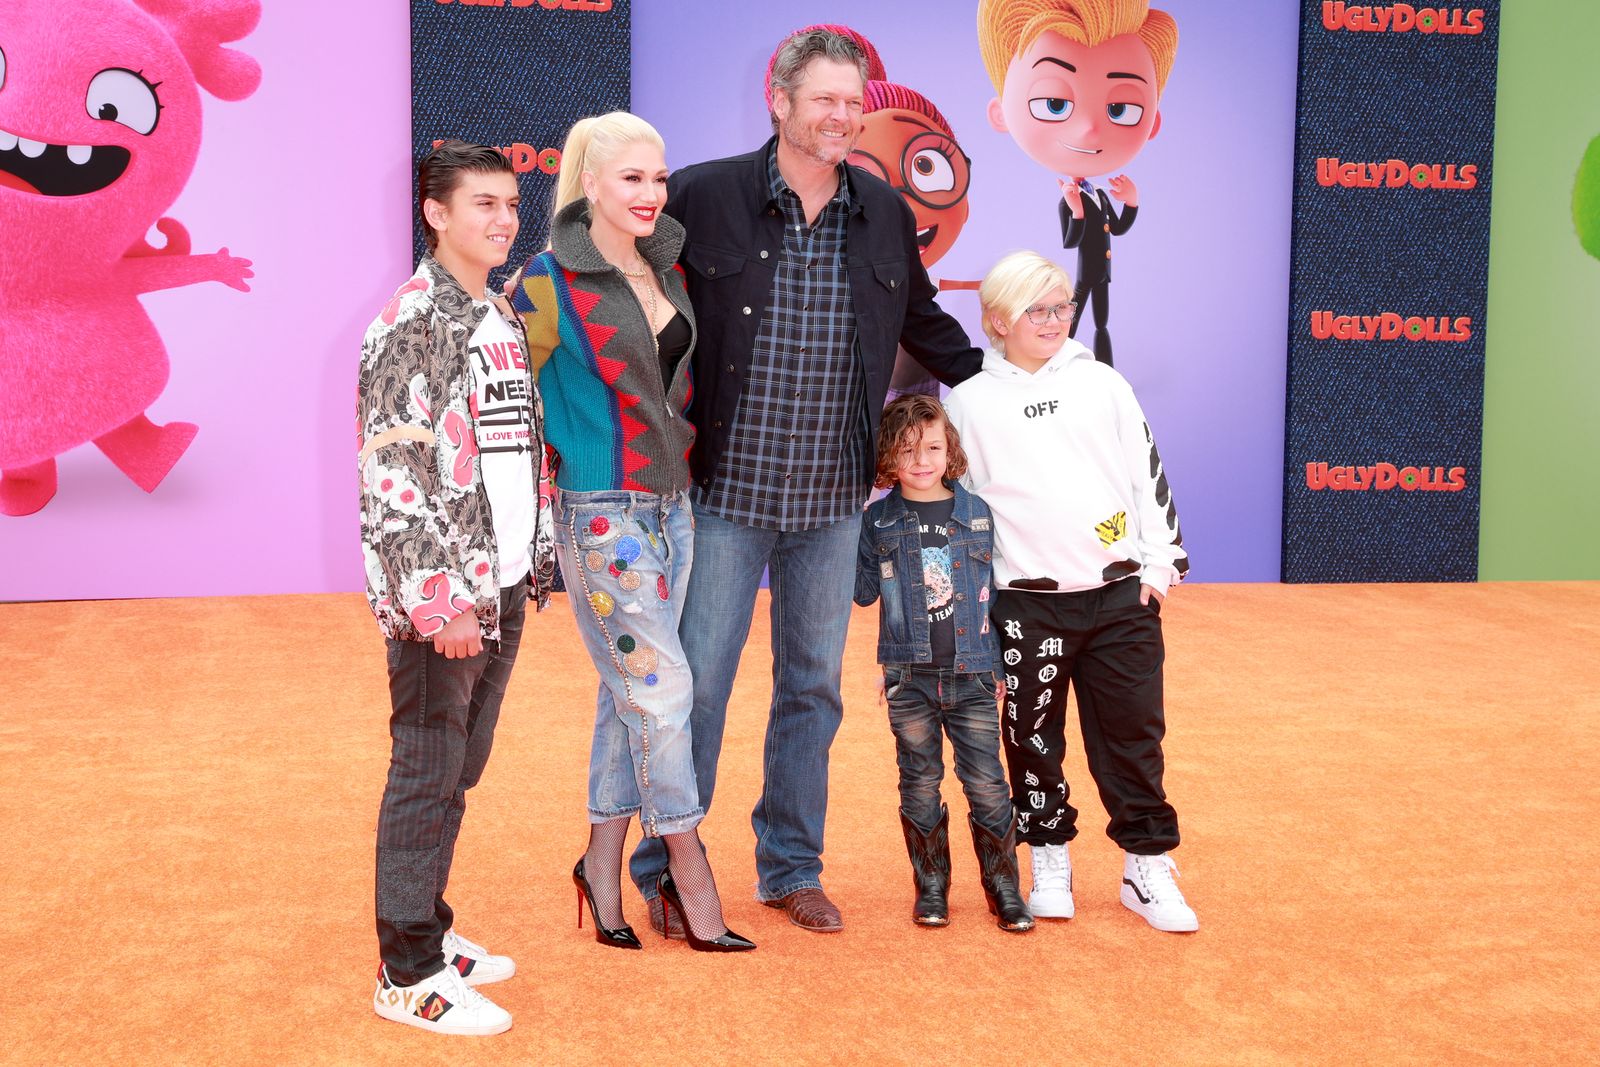 Kingston Rossdale, Gwen Stefani, Blake Shelton, Apollo Bowie Flynn Rossdale, and Zuma Nesta Rock Rossdale at the World Premiere of "UglyDolls" on April 27, 2019, in Los Angeles, California | Photo: Rich Fury/Getty Images